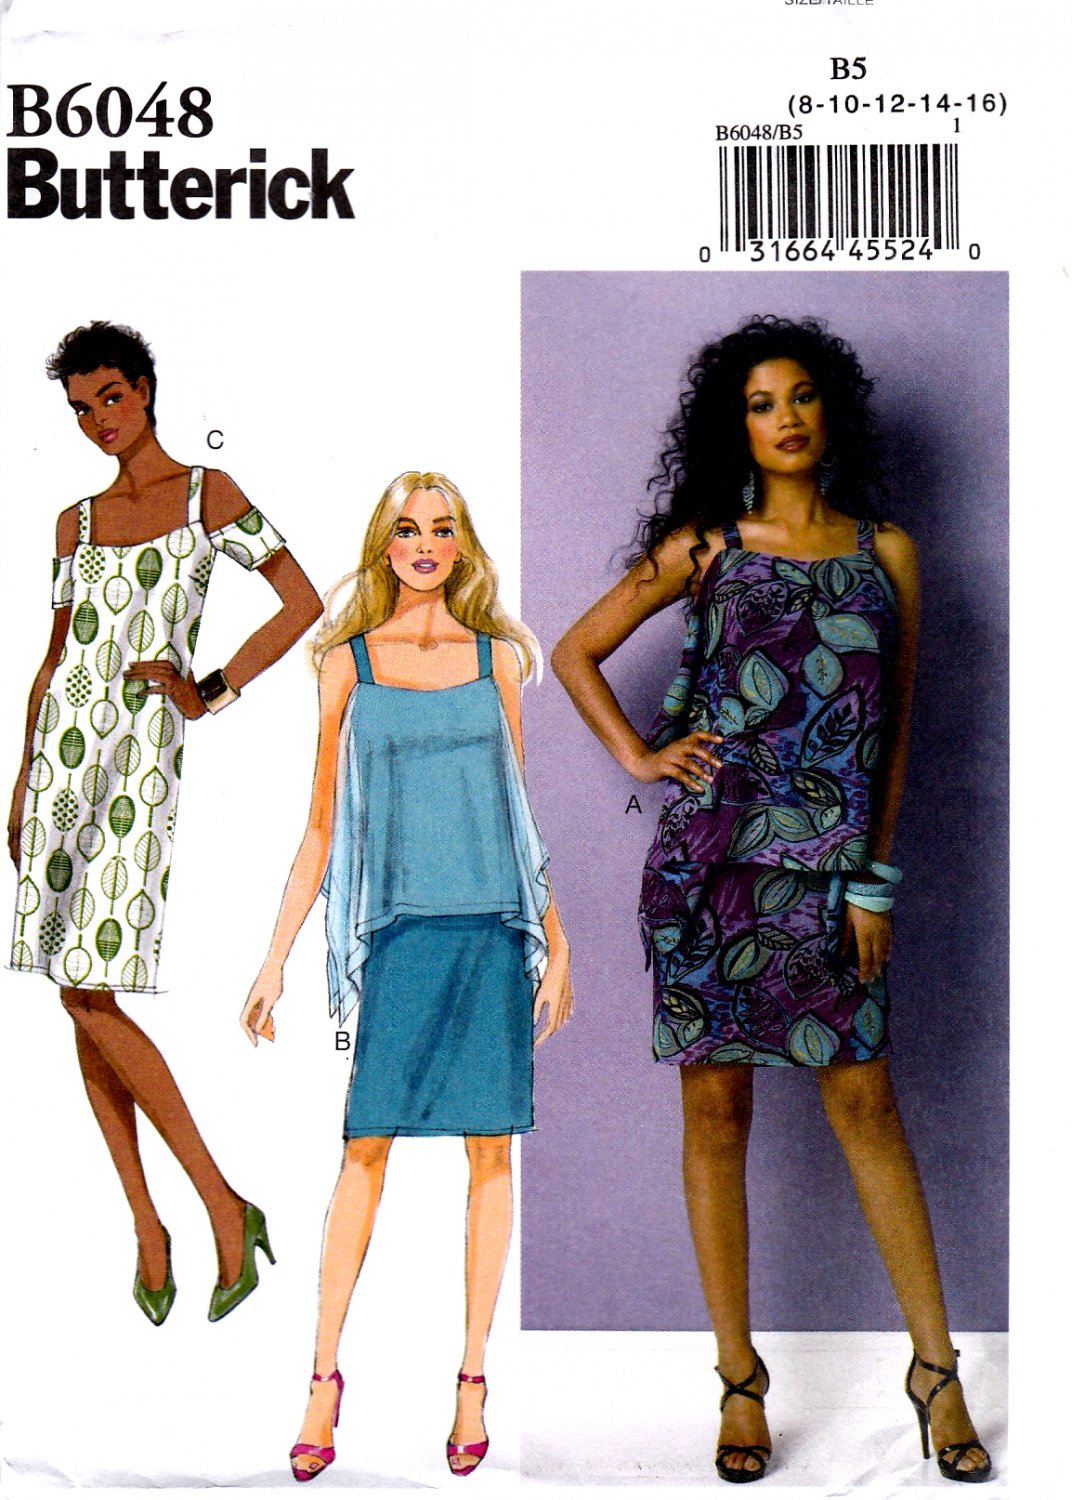 Butterick B6048 6048 Misses Dress Fitted Pullover With Straps Sewing Pattern Sizes 8-10-12-14-16